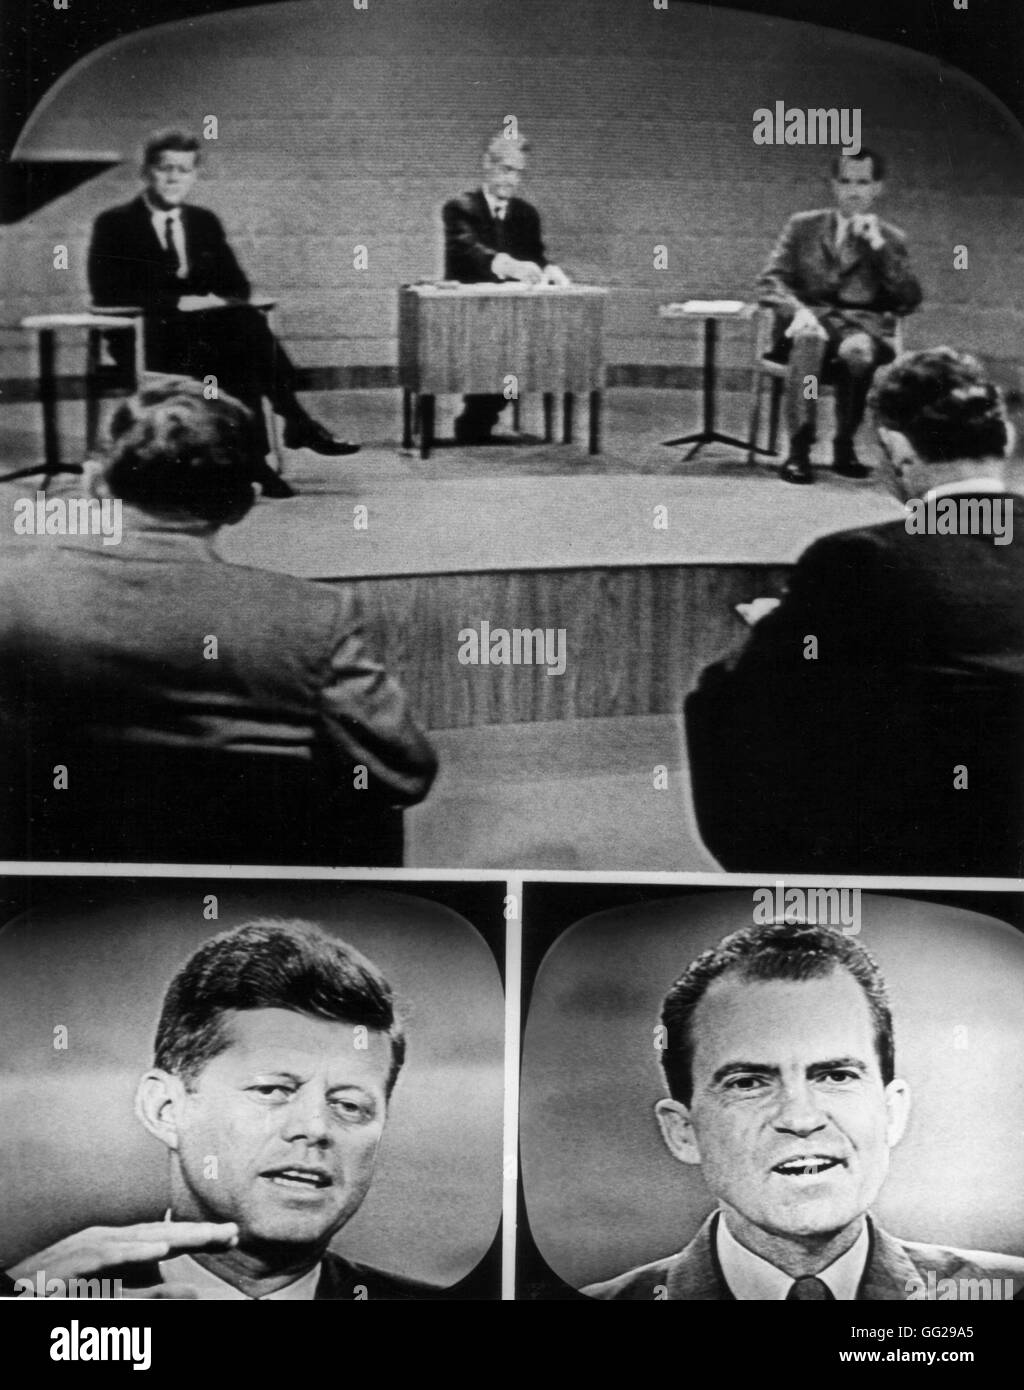 Presidential campaign. Televised debate between John F. Kennedy and Richard Nixon September 26, 1960 United States National archives. Washington Stock Photo